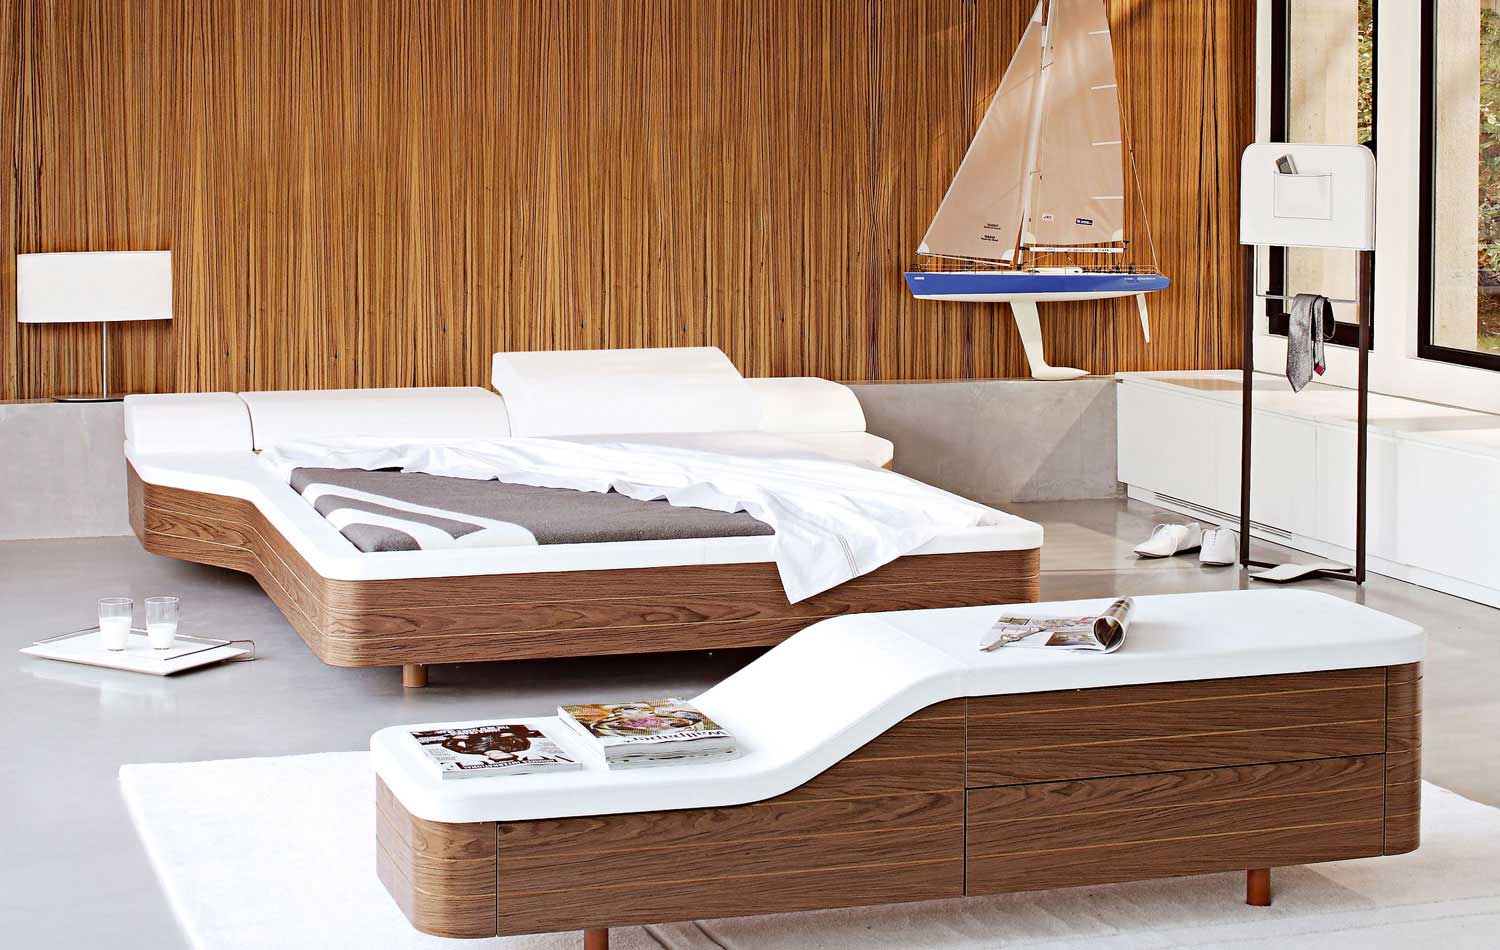 19 Cool & Unique Bed Designs That You Must See